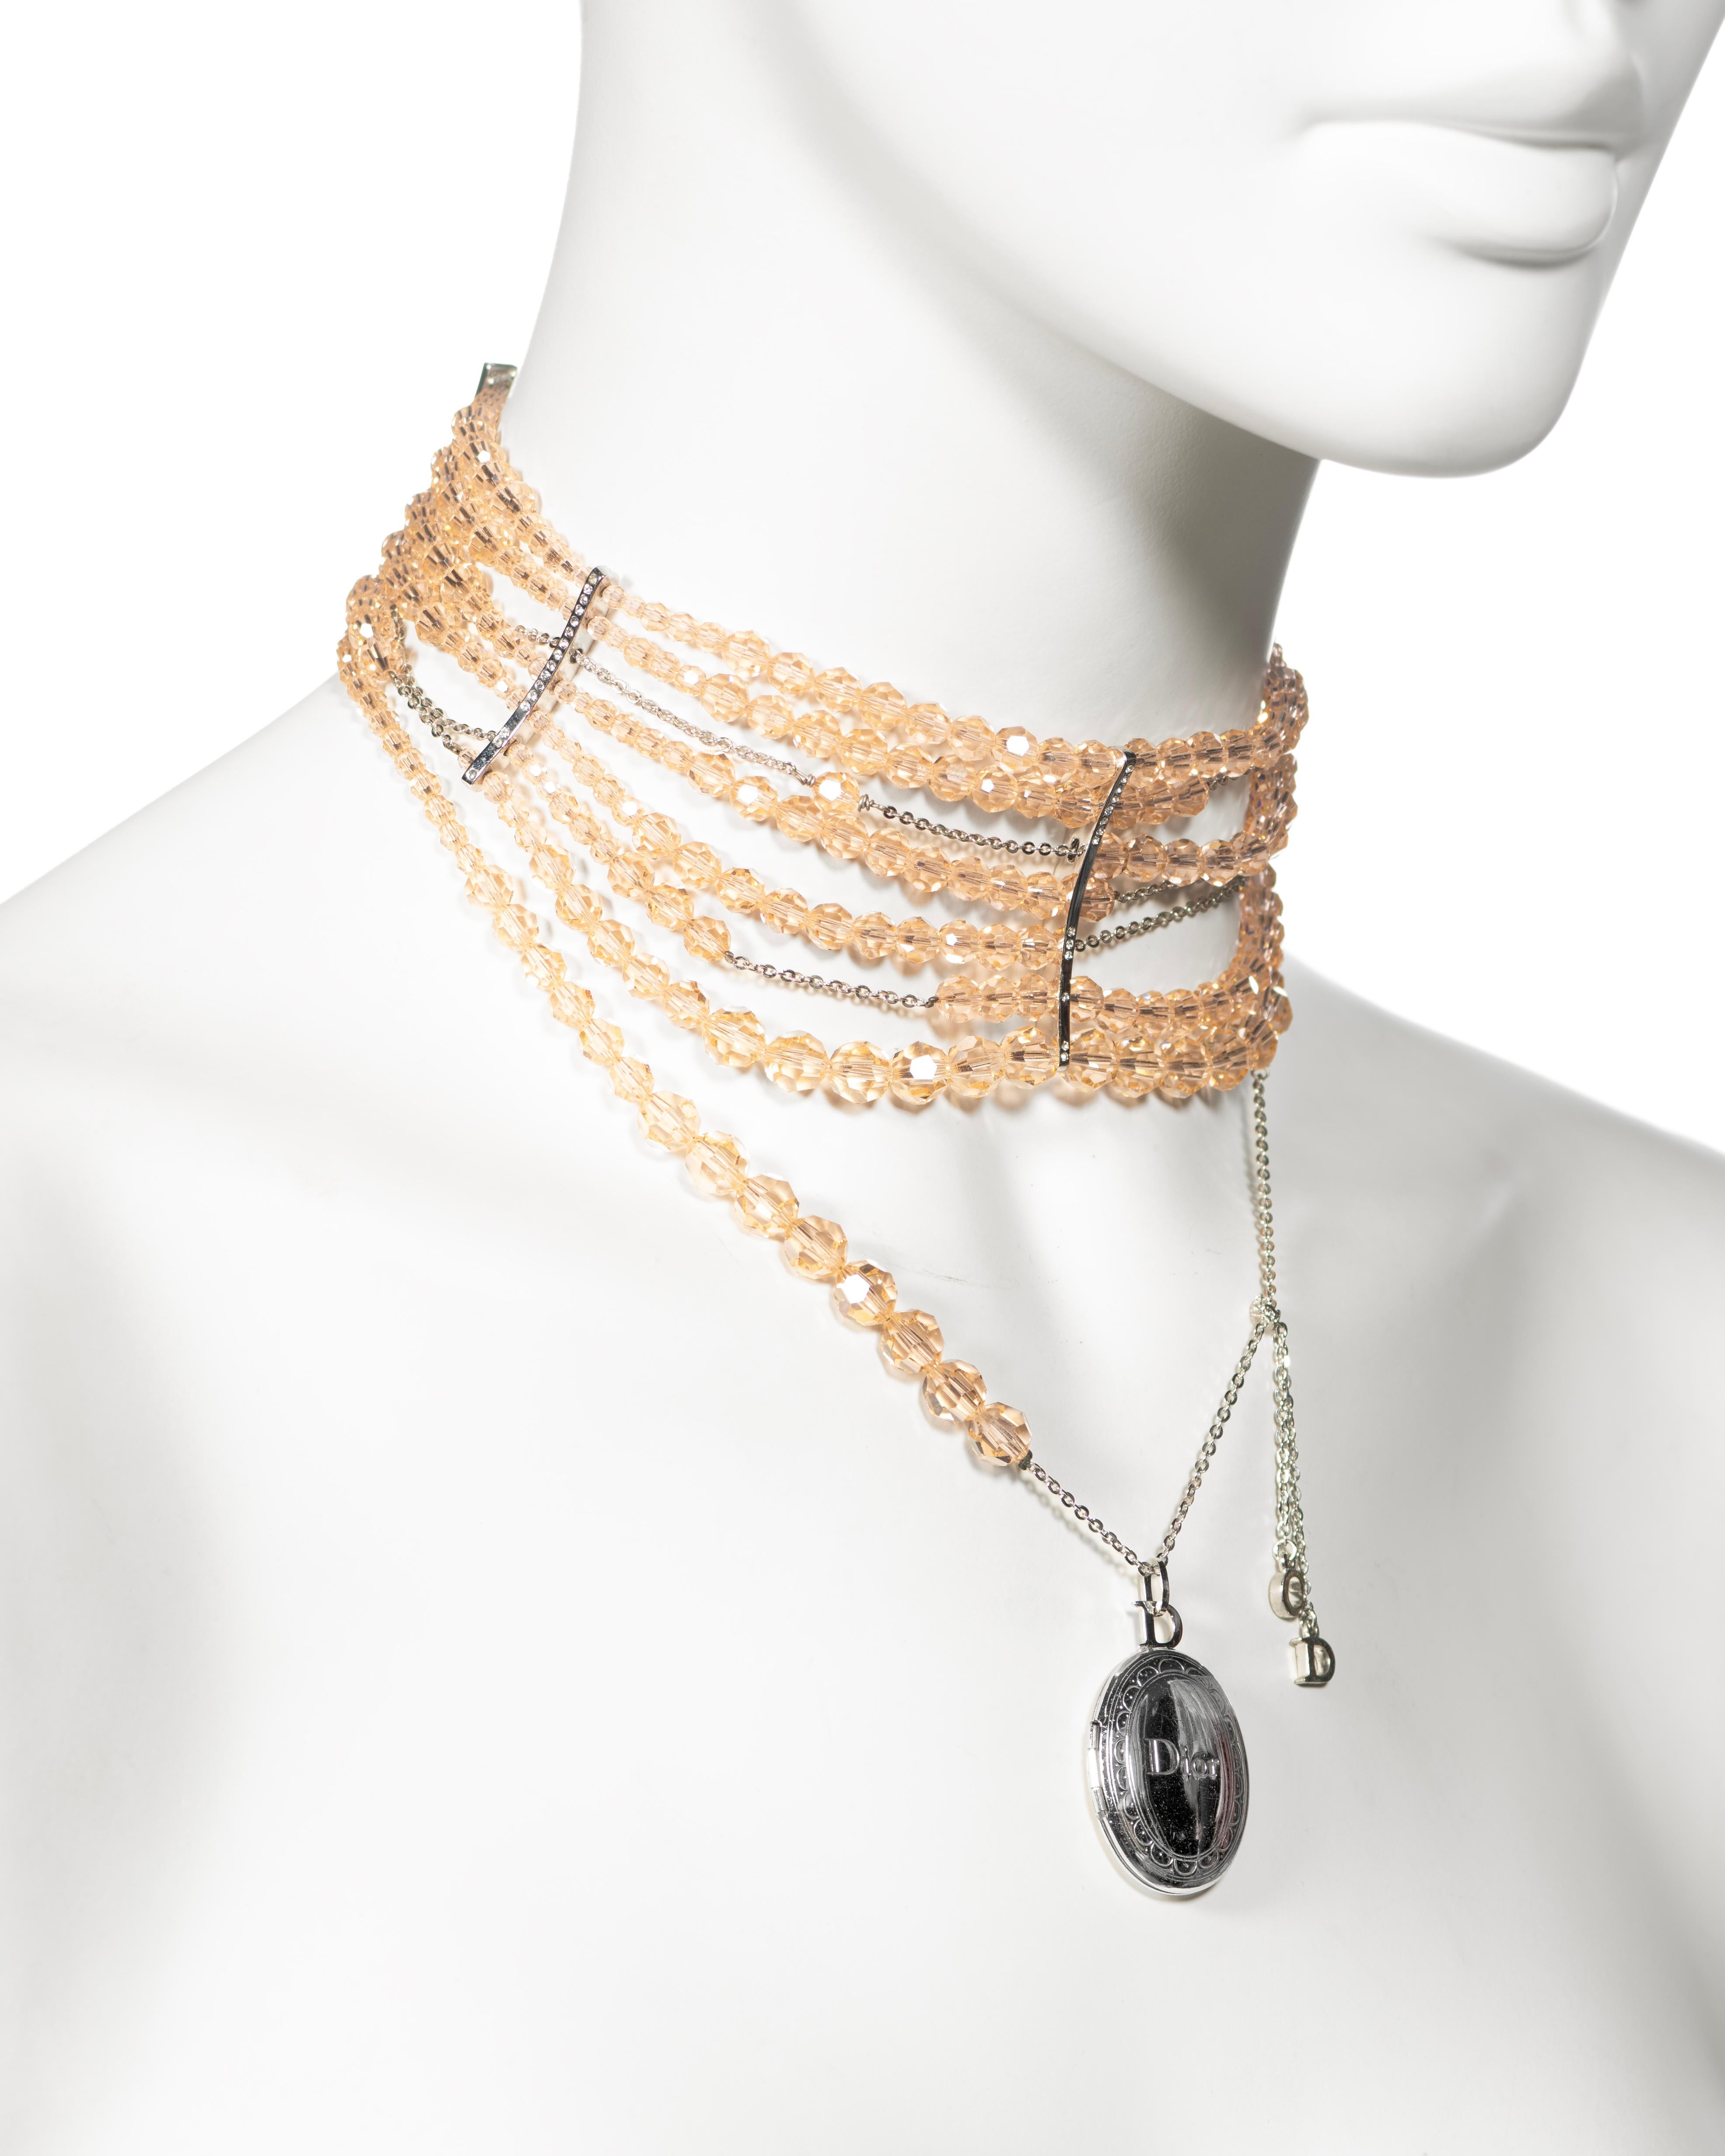 Christian Dior by John Galliano Distressed Peach Bead Choker Necklace, c. 2004 For Sale 4